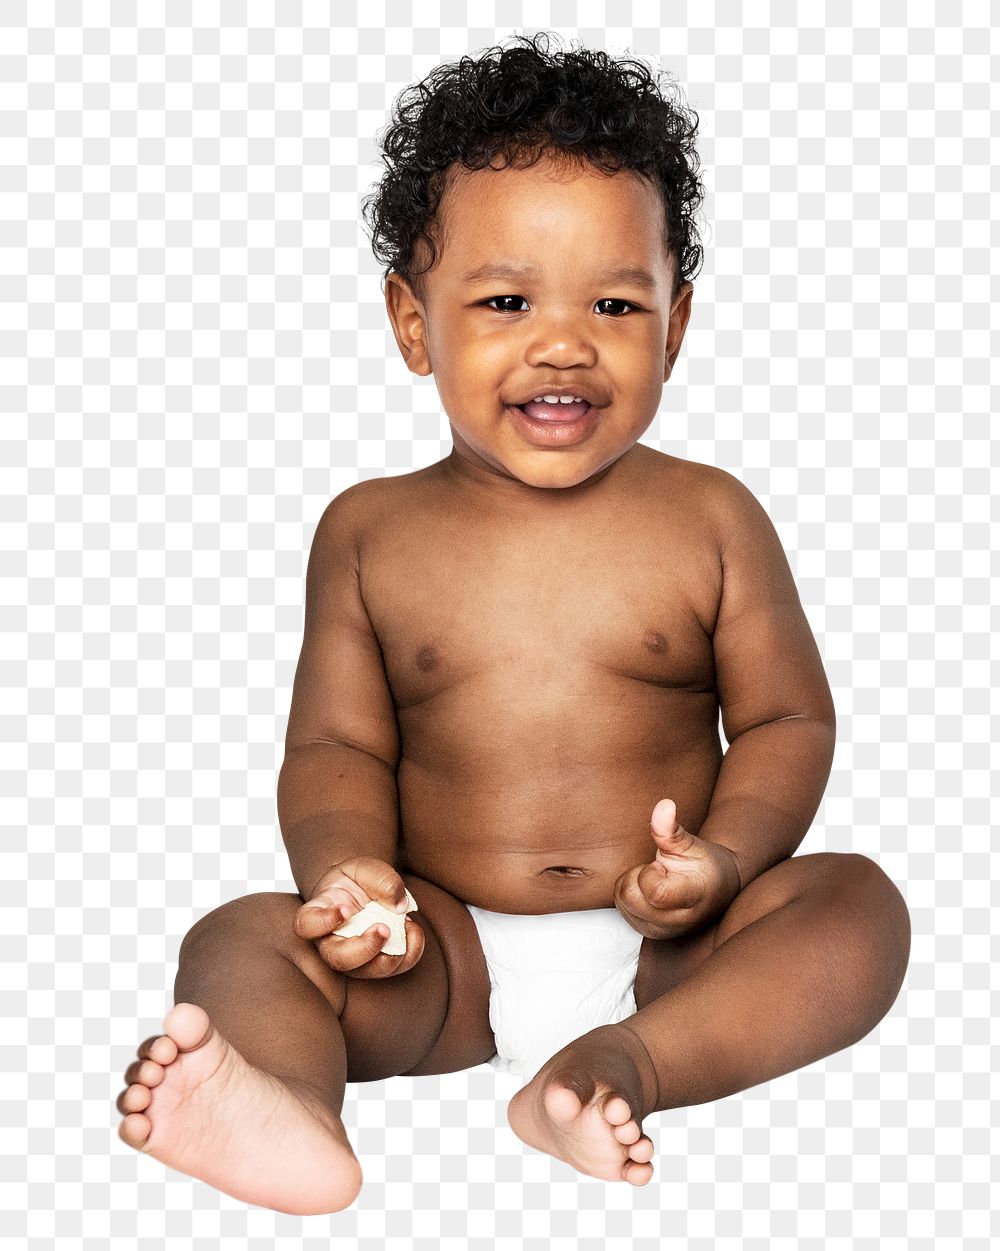 African baby png clipart, transparent background